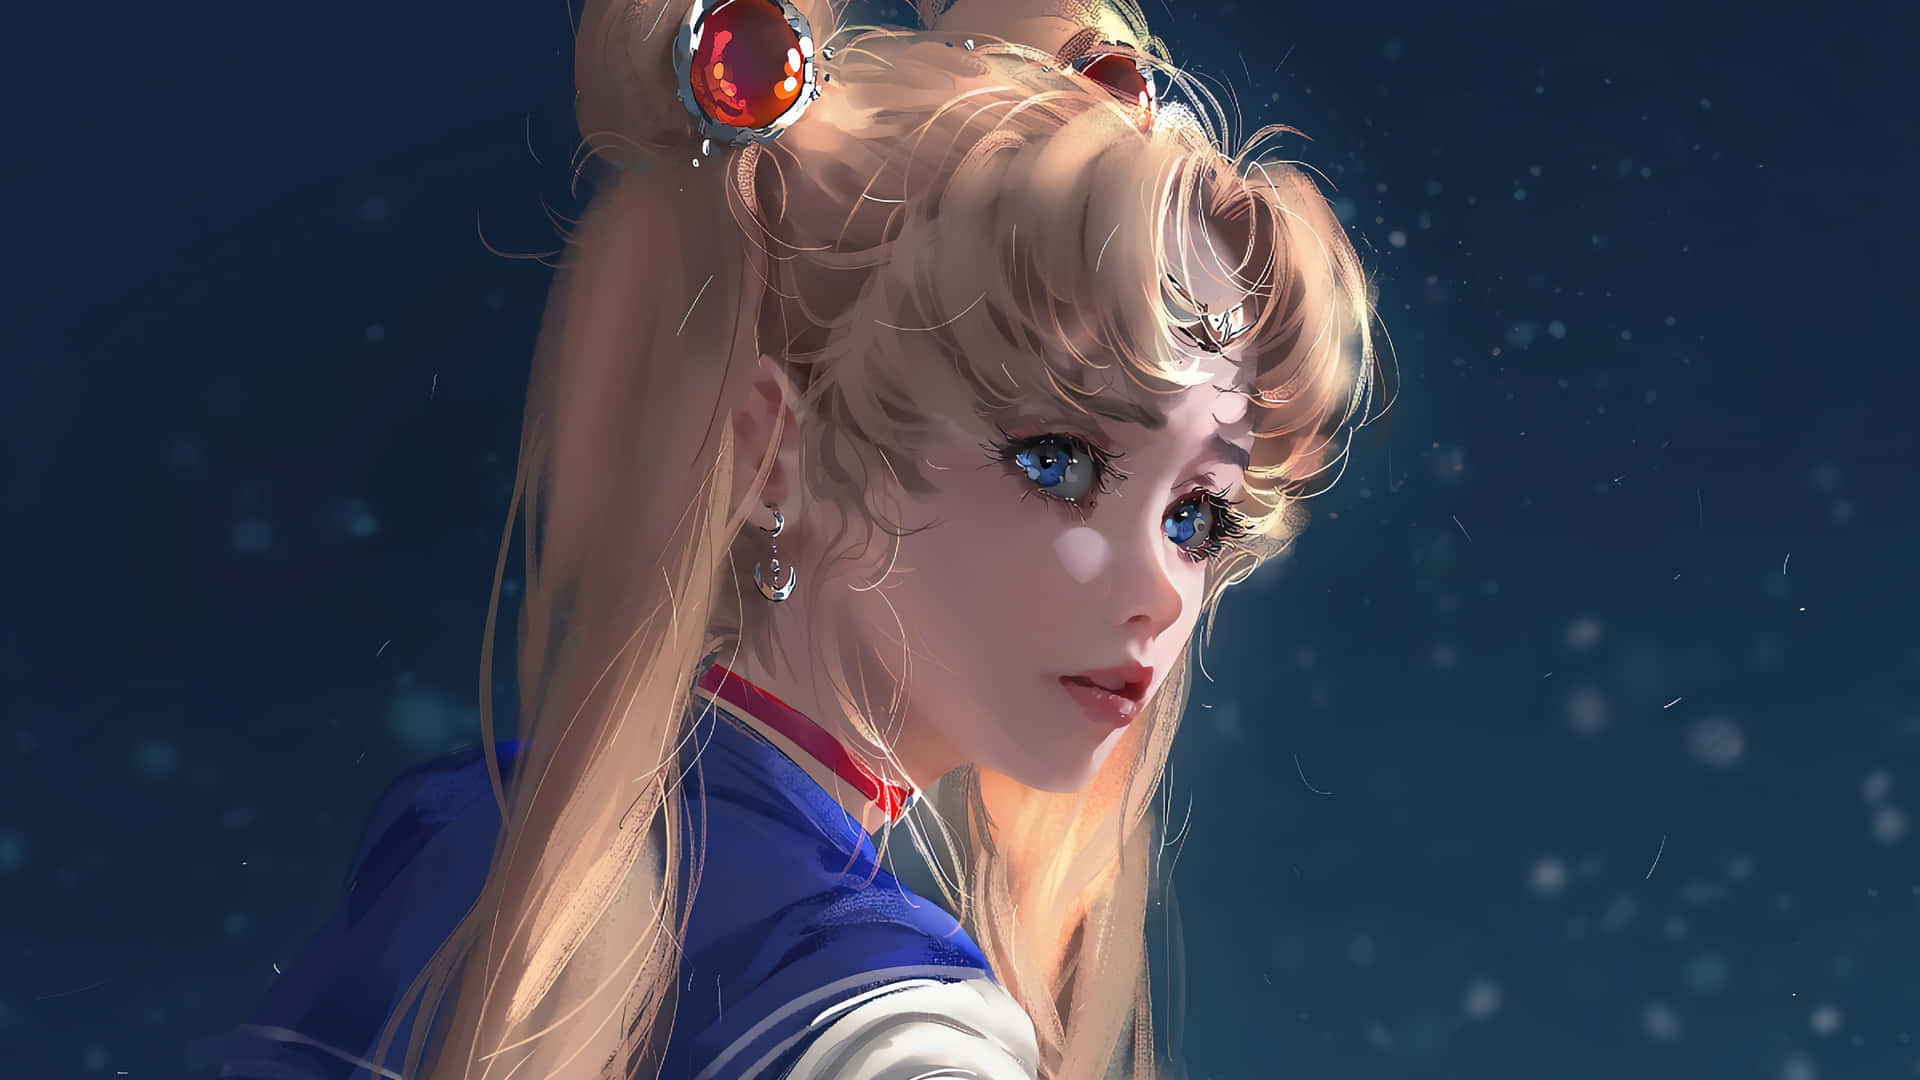 100+] Aesthetic Sailor Moon Backgrounds